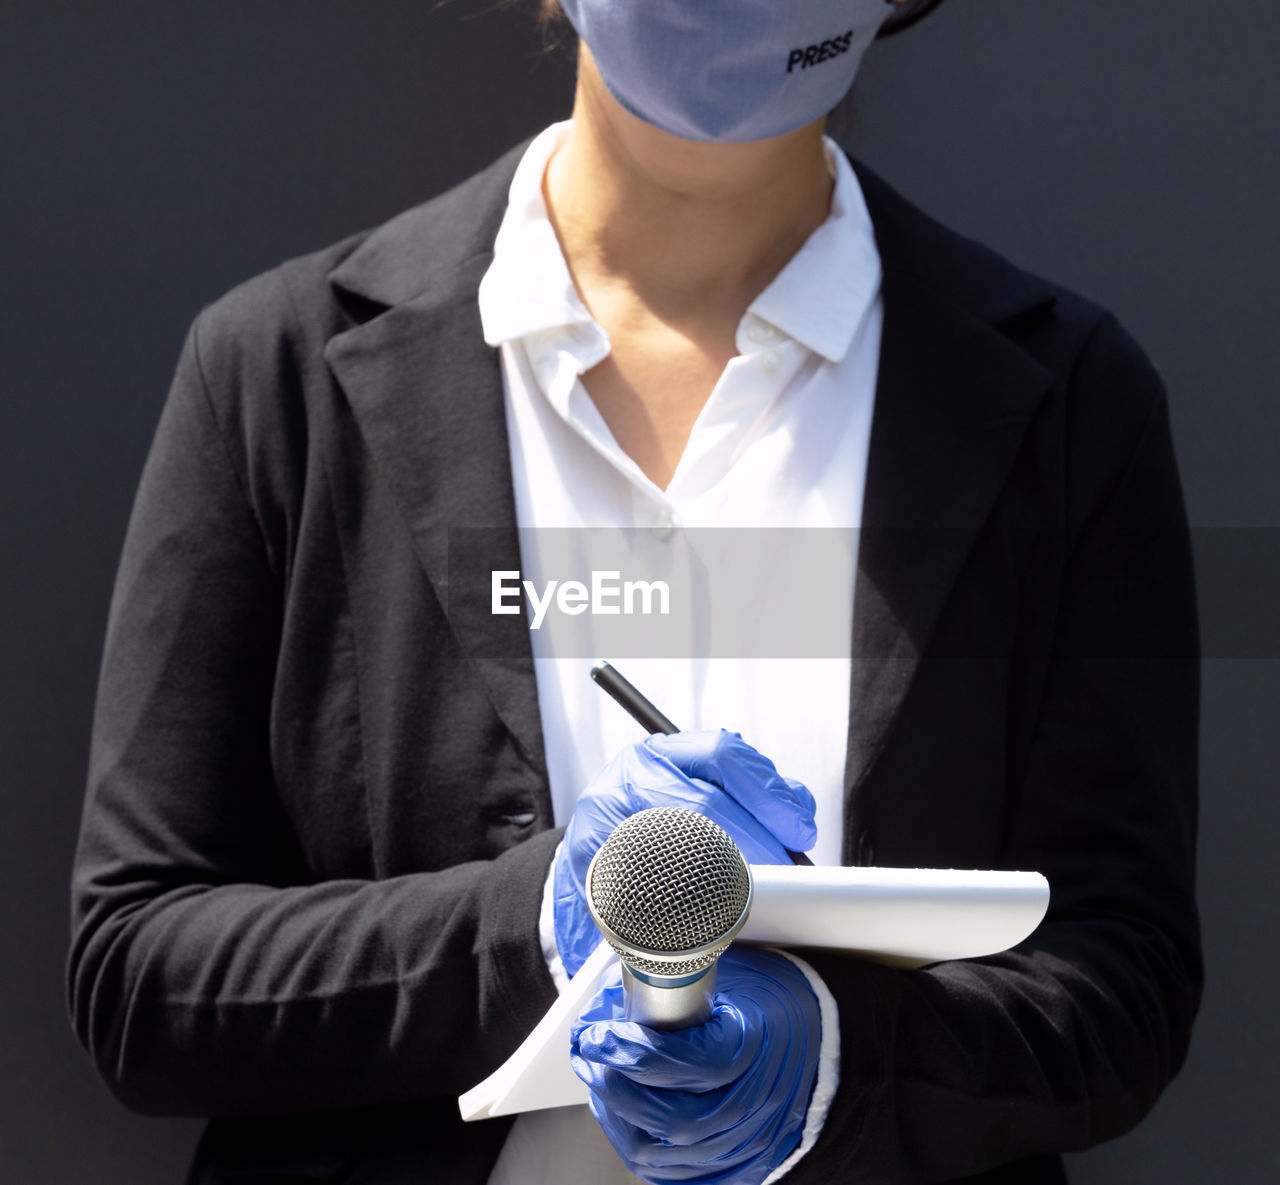 Female journalist wearing protective gloves and face mask against coronavirus covid-19 disease